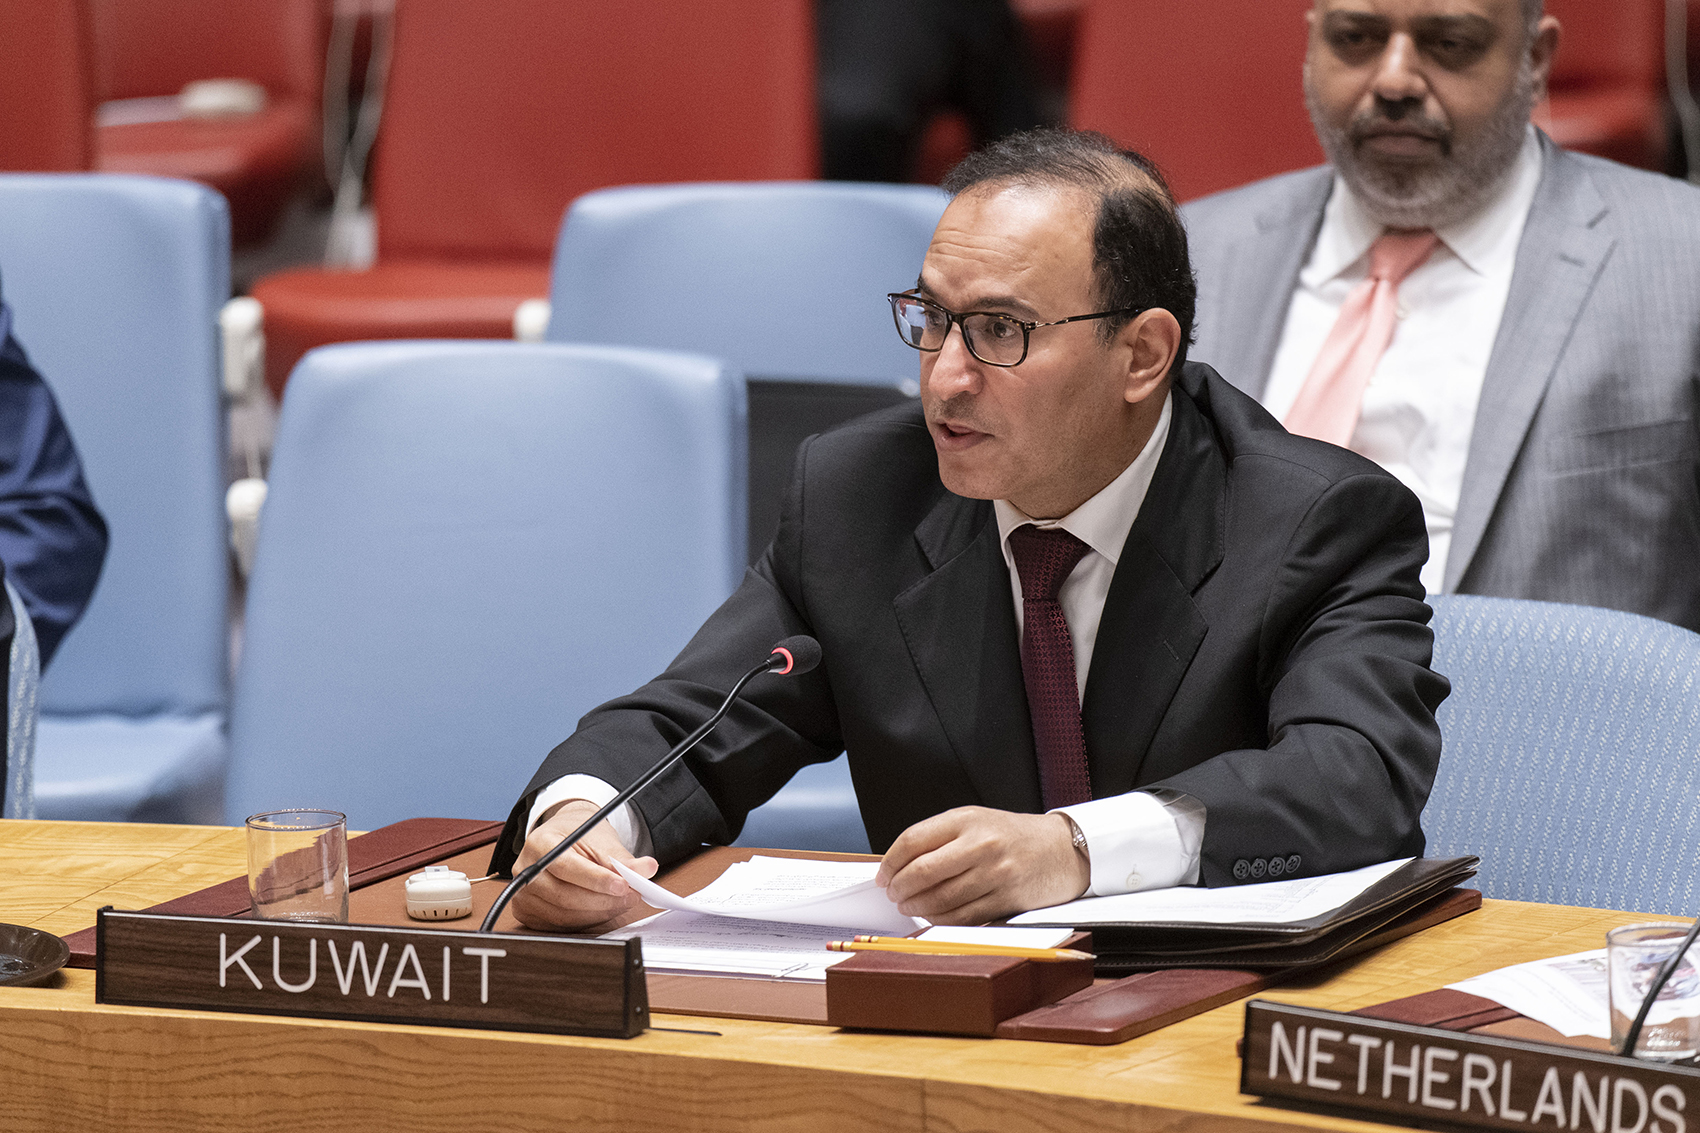 Kuwait's Permanent Representative to the UN Ambassador Mansour Al-Otaibi addresses the special UN Security Council session on the latest developments in Afghanistan